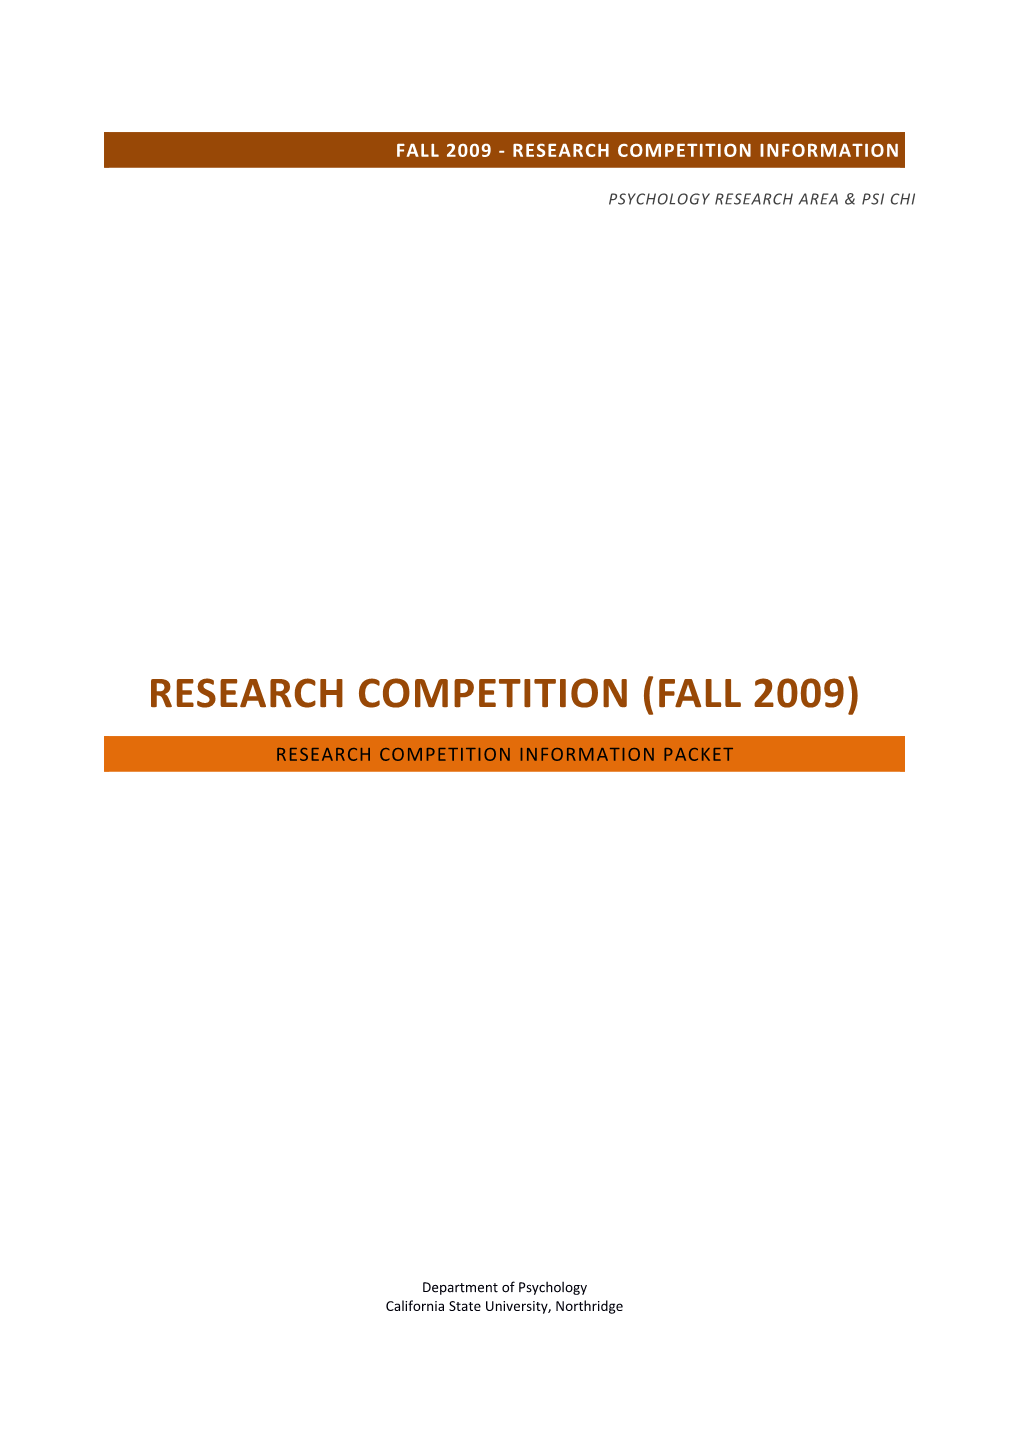 FALL 2009 - Research Competition Information